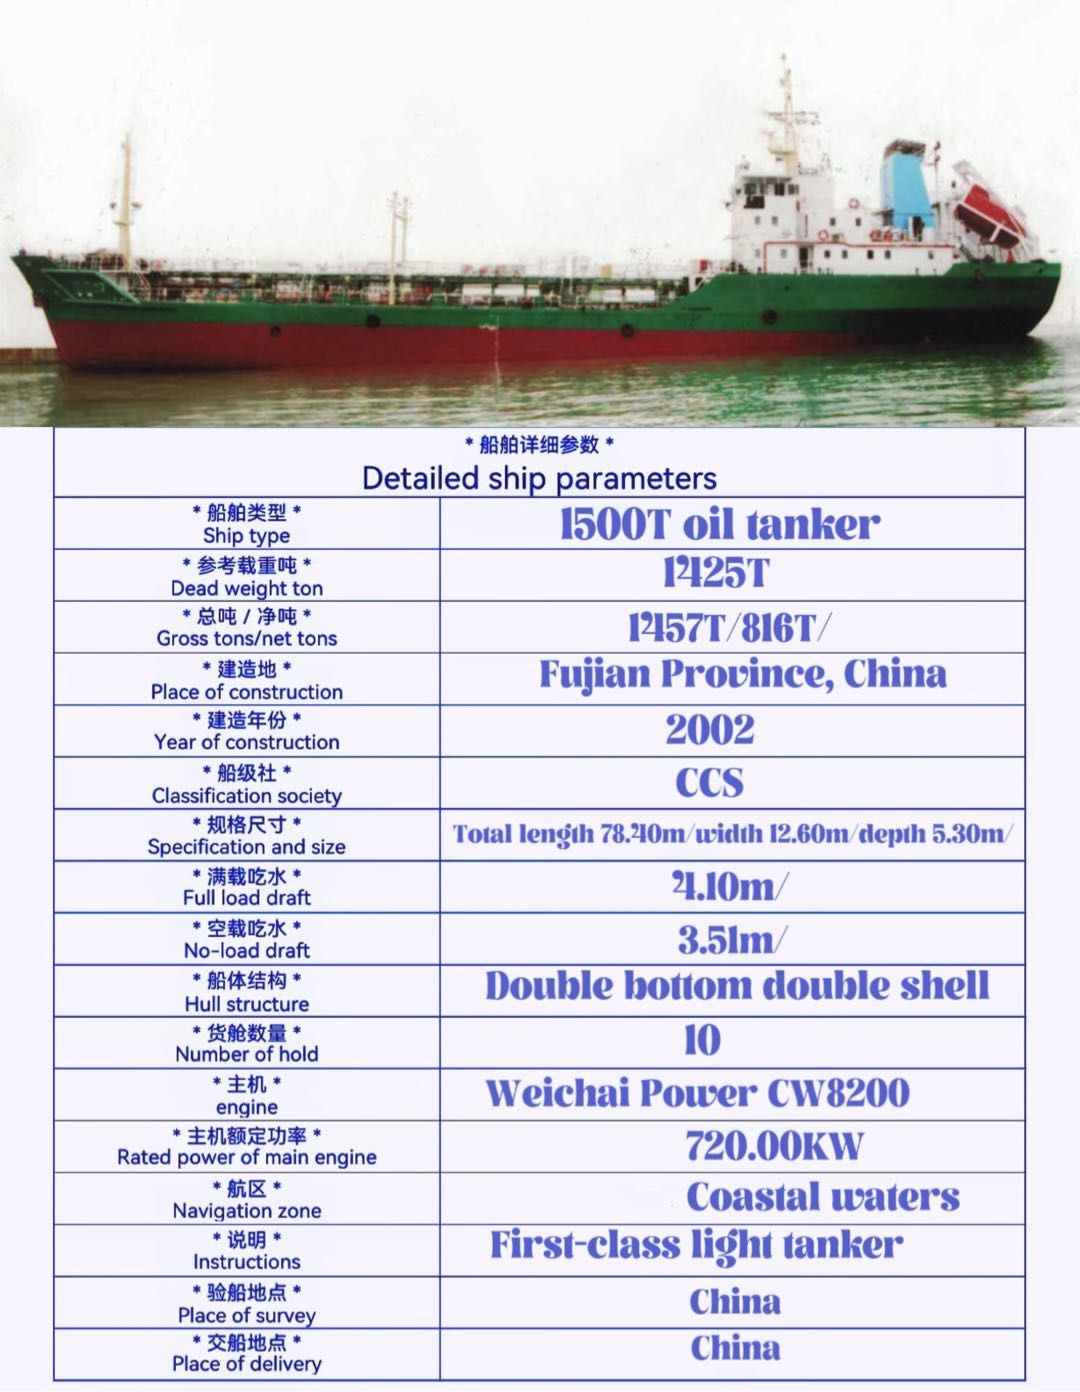 For sale: 1,500-ton double-bottom double-shell oil tanker, made in China in 2002, classification age